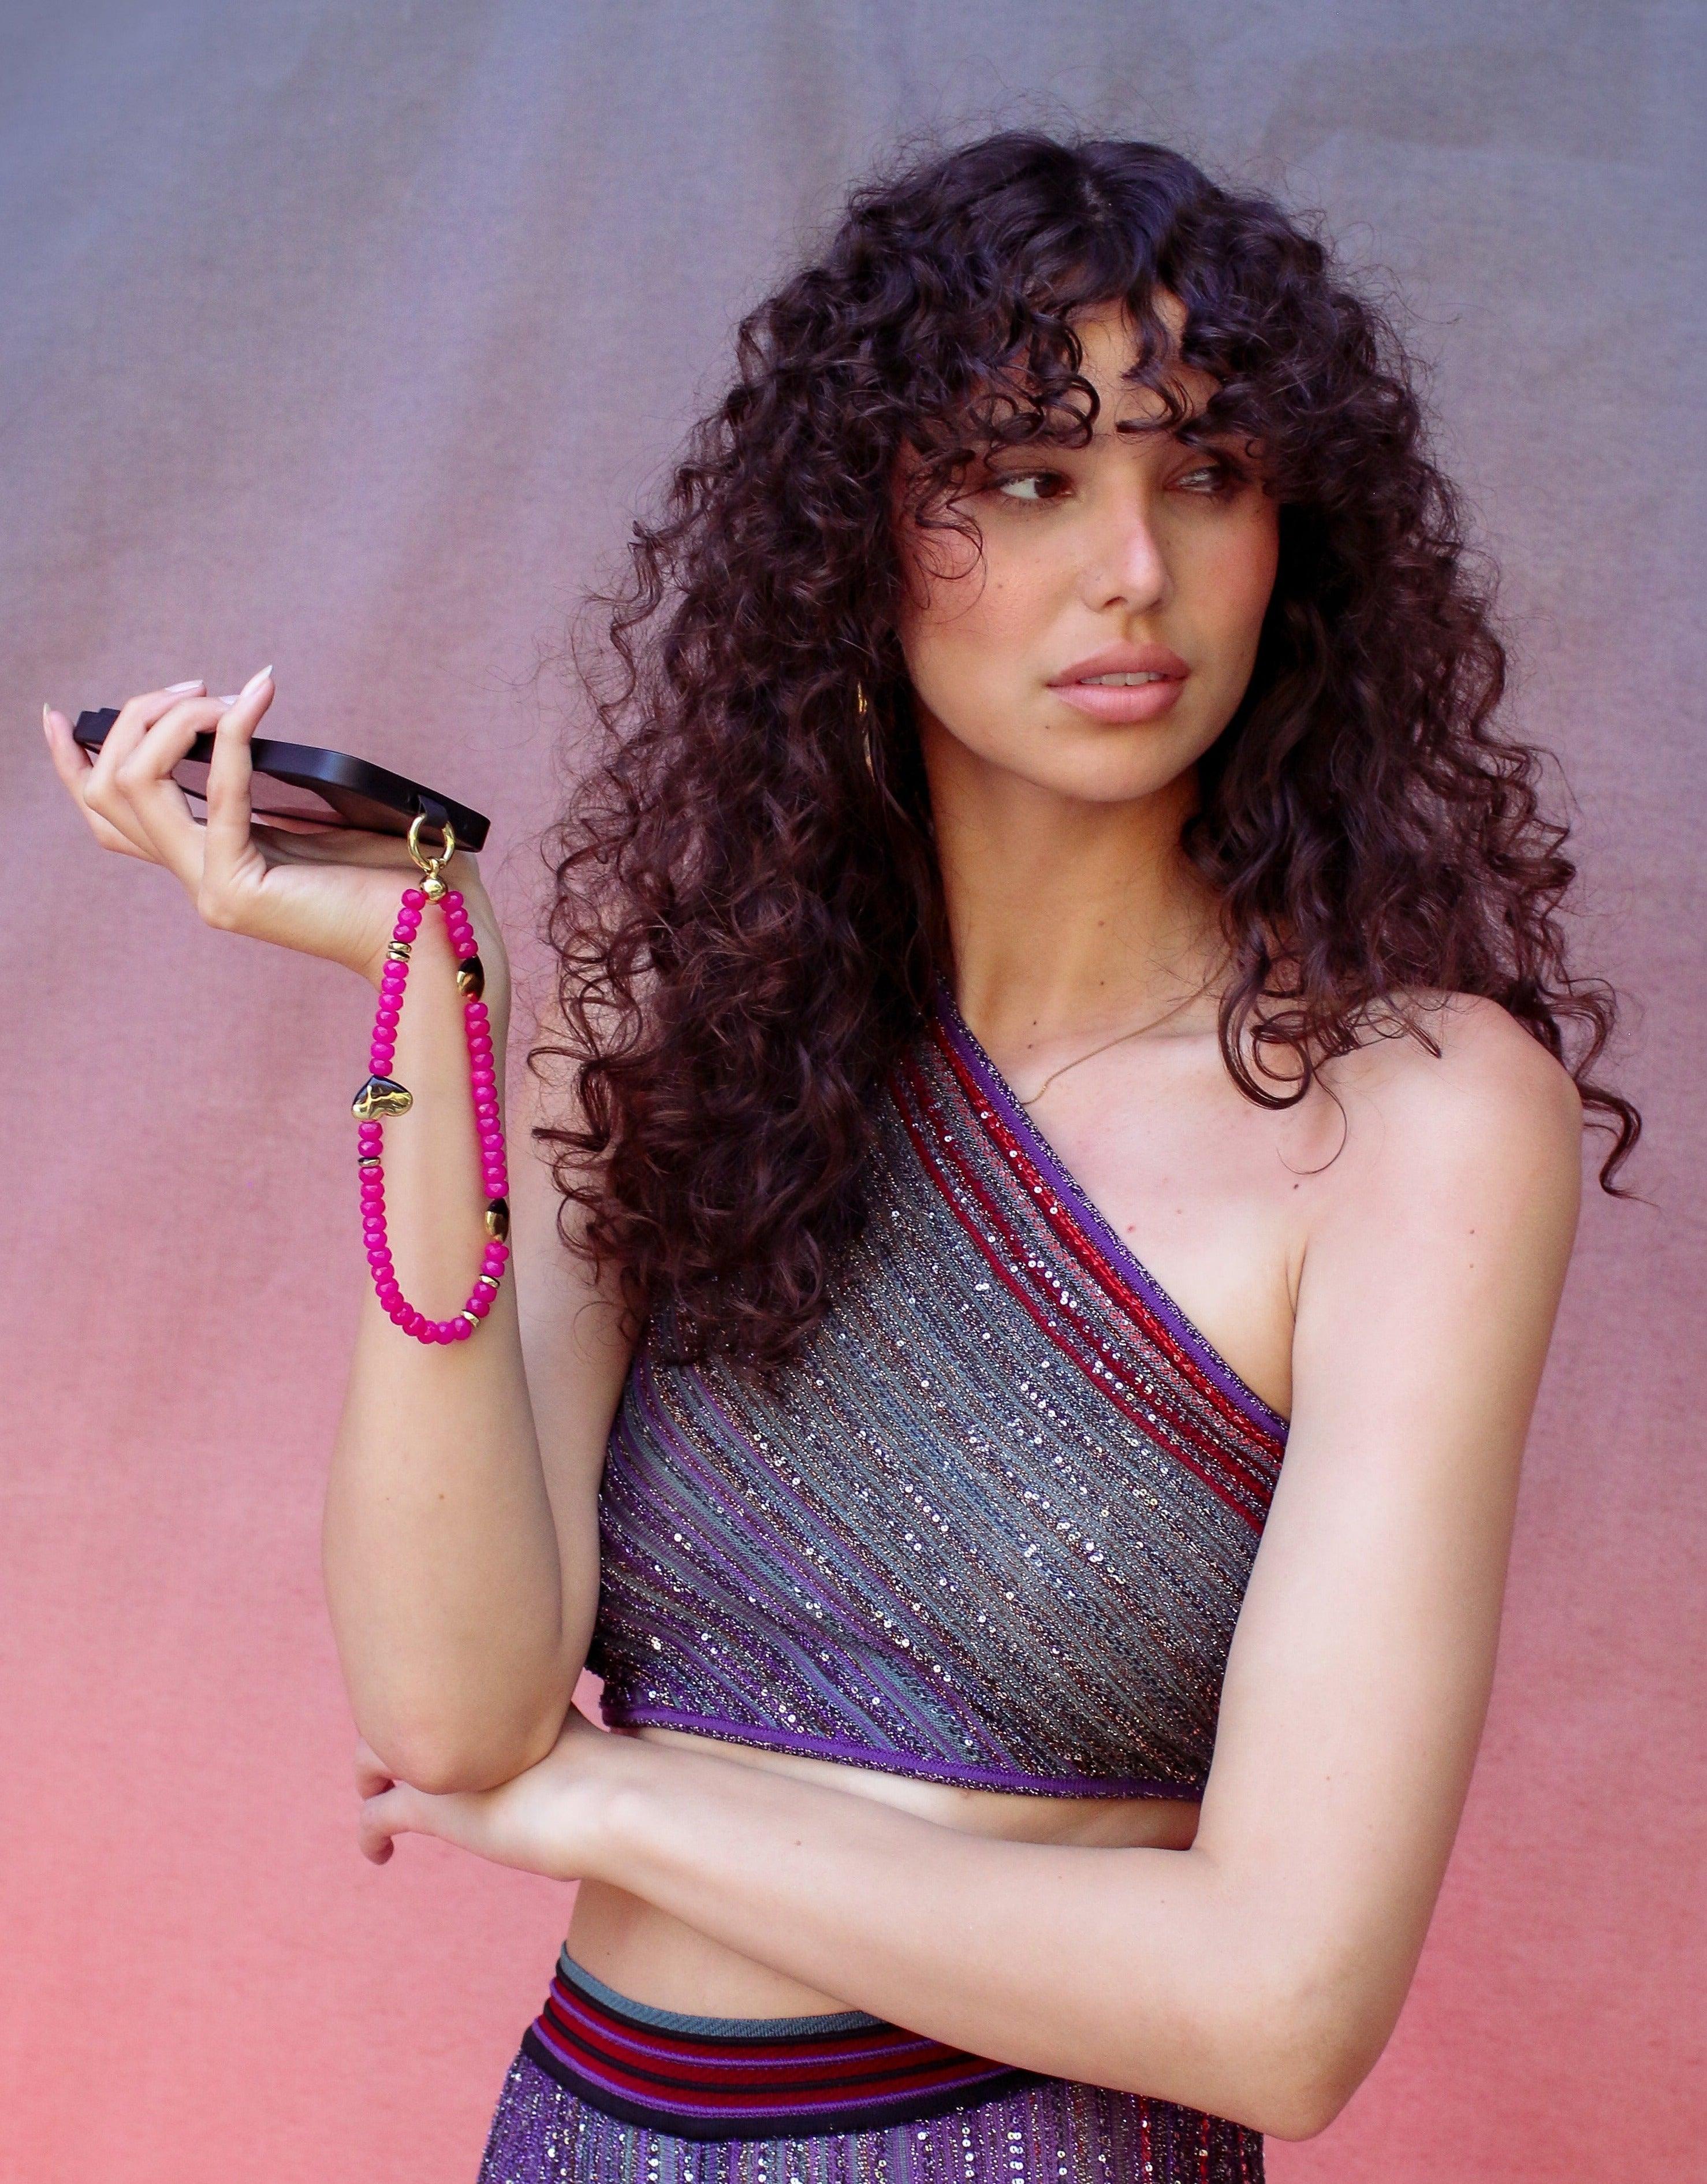 Woman in violet clothes holding a phone with a pink beaded strap